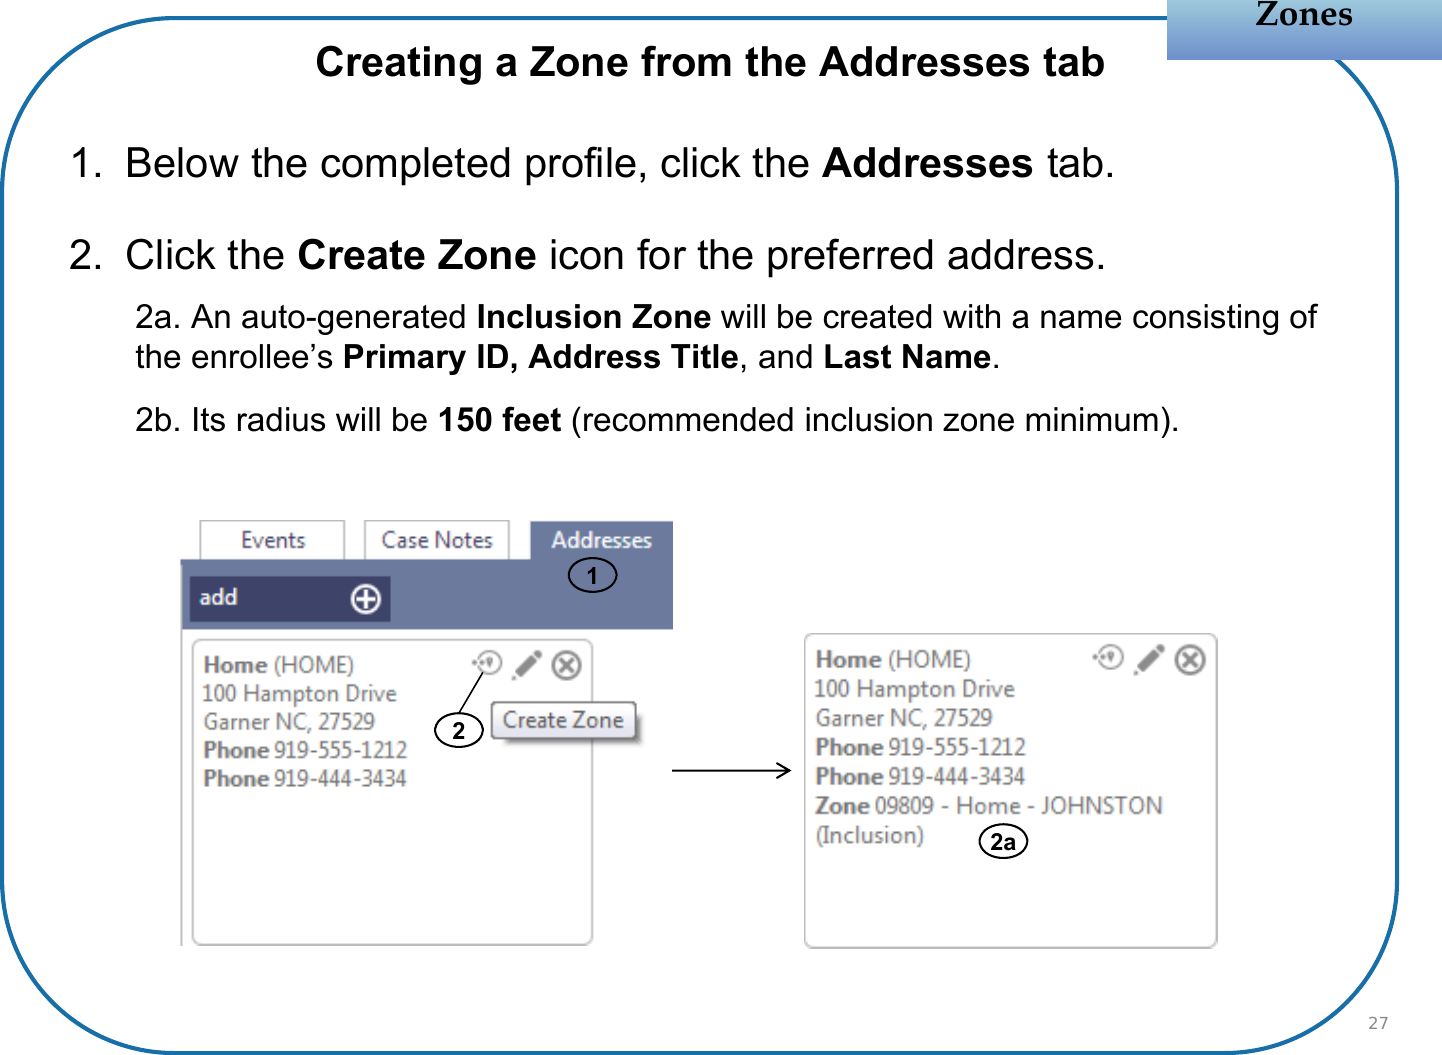 Creating a Zone from the Addresses tab1. Below the completed profile, click the Addresses tab.2. Click the Create Zone icon for the preferred address.2a. An auto-generated Inclusion Zone will be created with a name consisting of the enrollee’s Primary ID, Address Title, and Last Name.2b. Its radius will be 150 feet (recommended inclusion zone minimum).ZonesZones2272a1